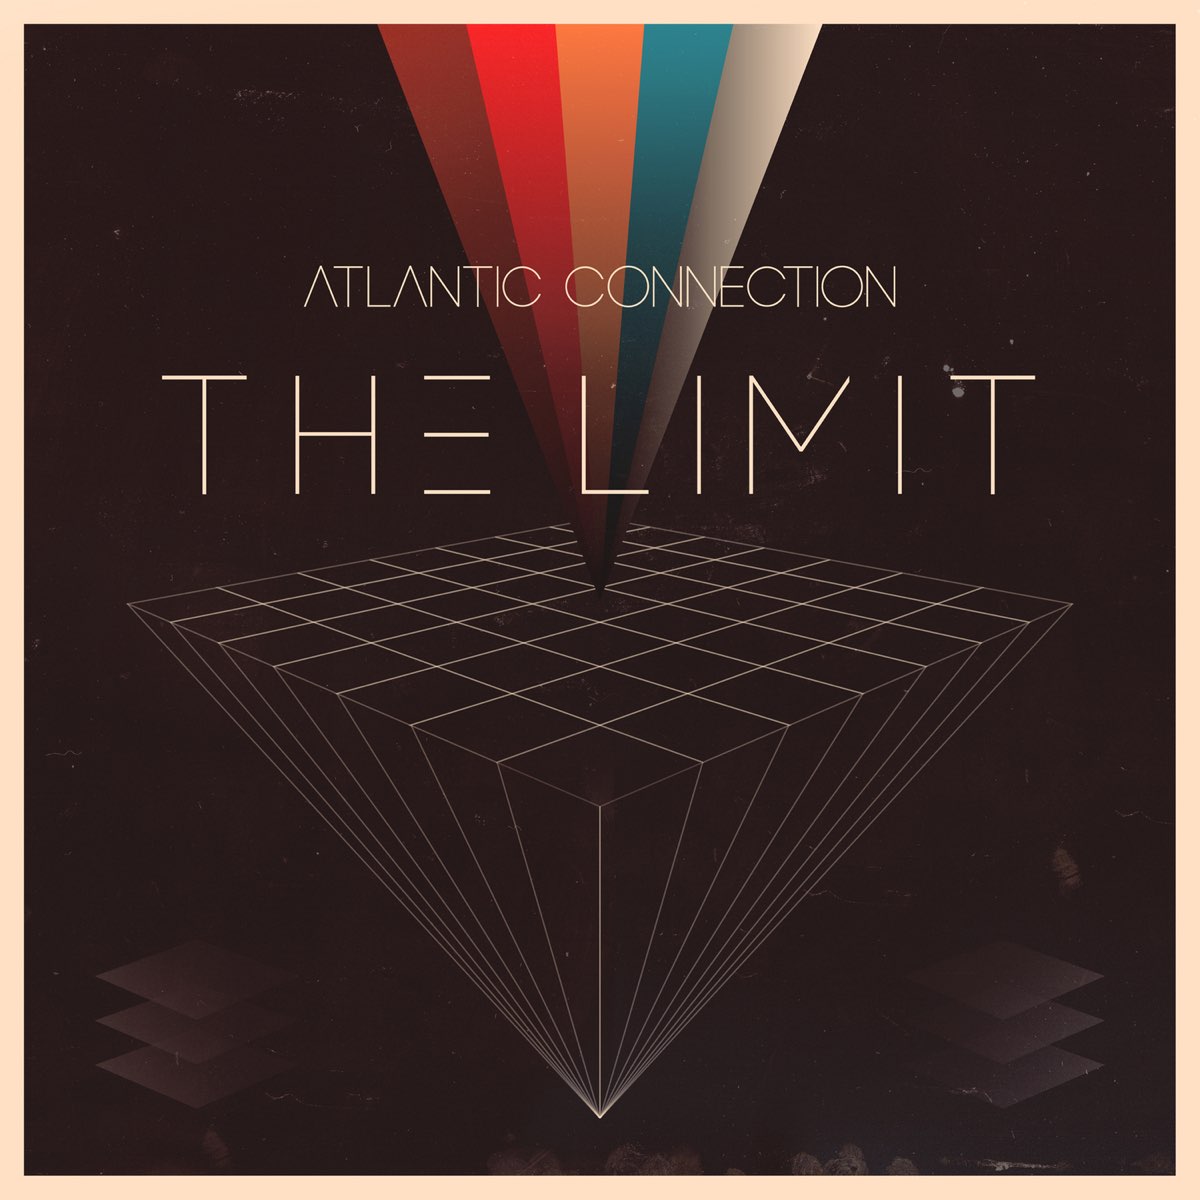 Last connect. Atlantic connection – Music for travelers Ep.